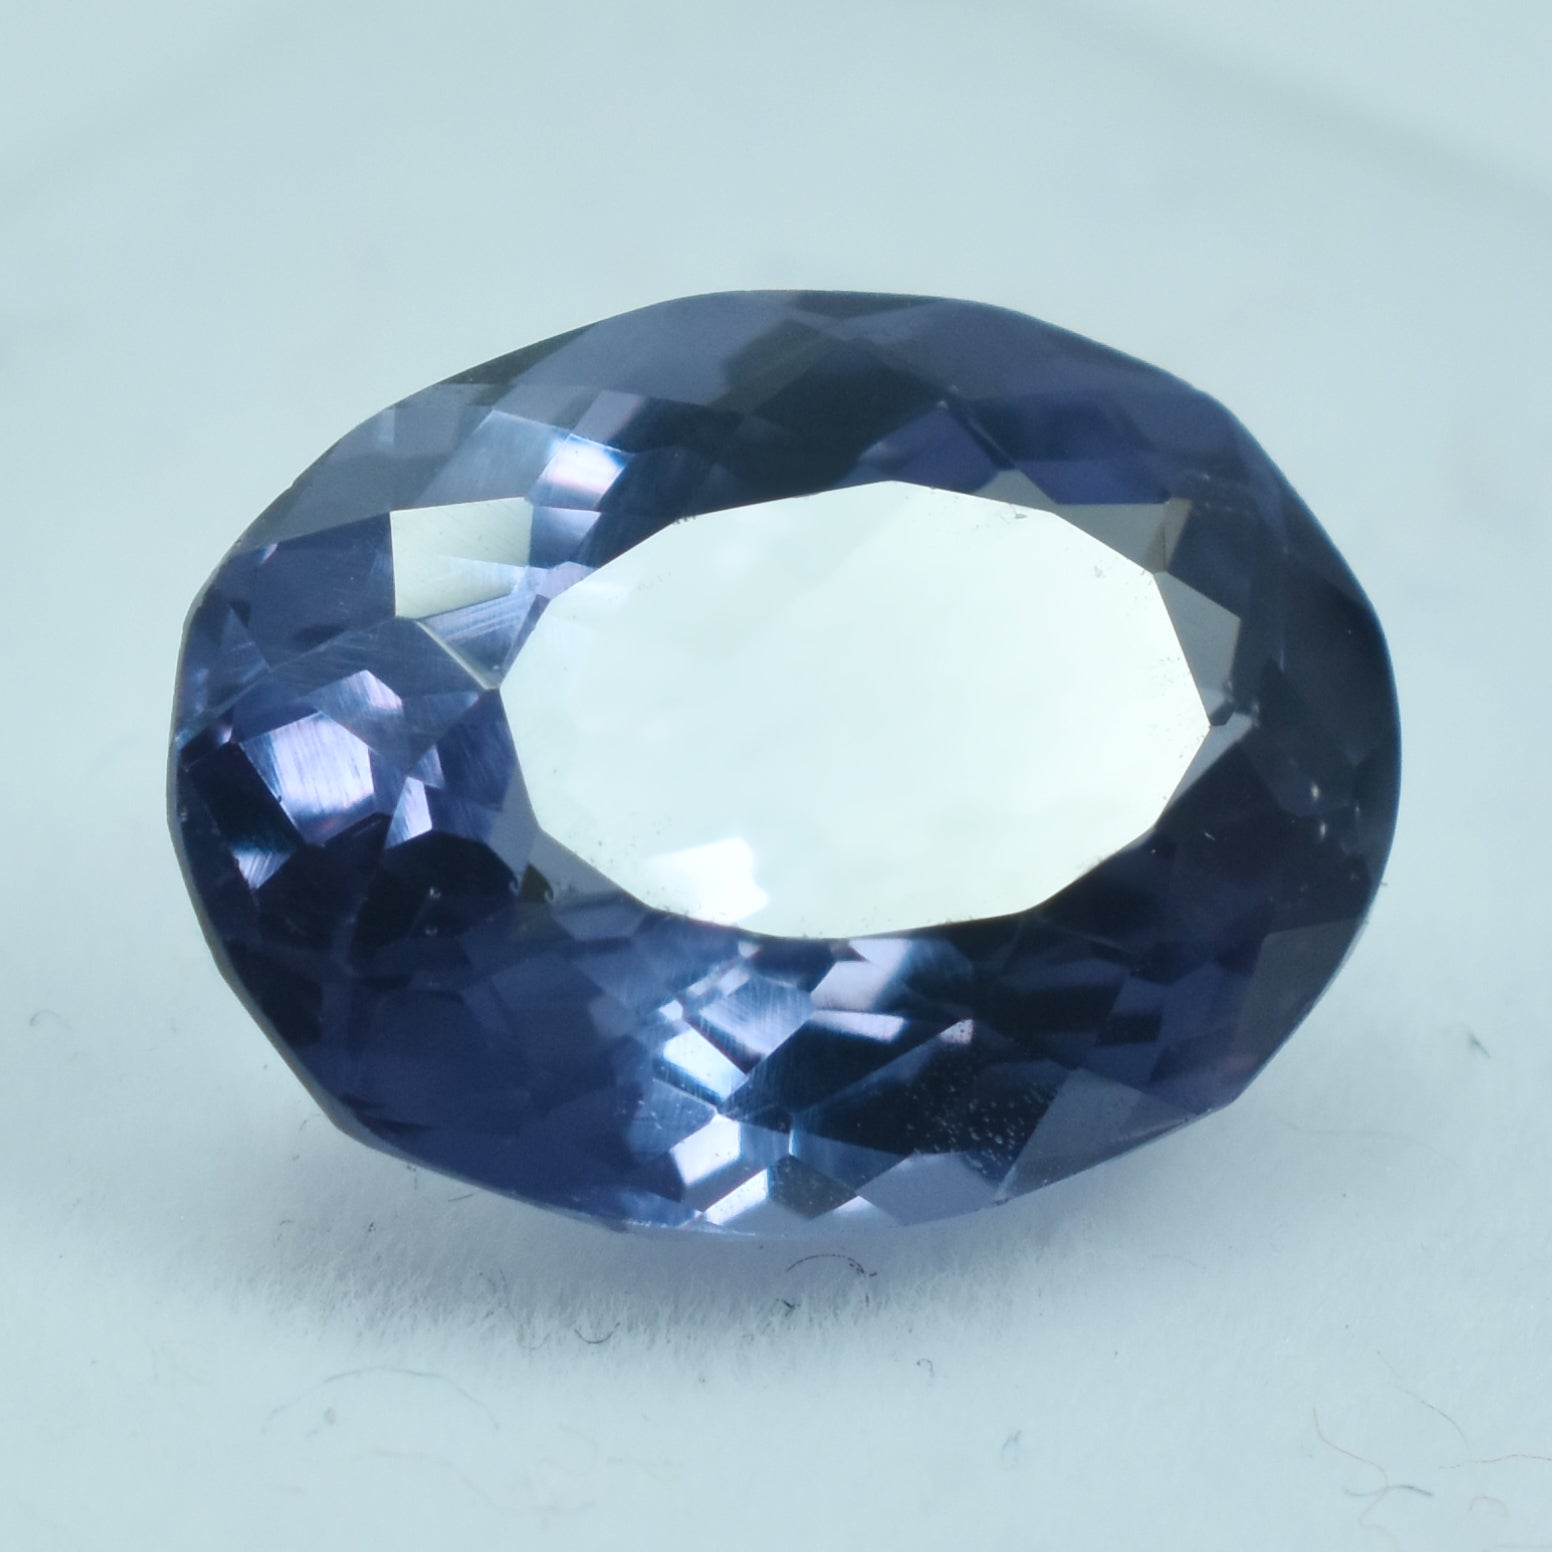 Beautiful Oval Cut Color-Change 7.45 Carat Alexandrite Natural Certified Loose Gemstone Alex Has Aesthetic Appeal